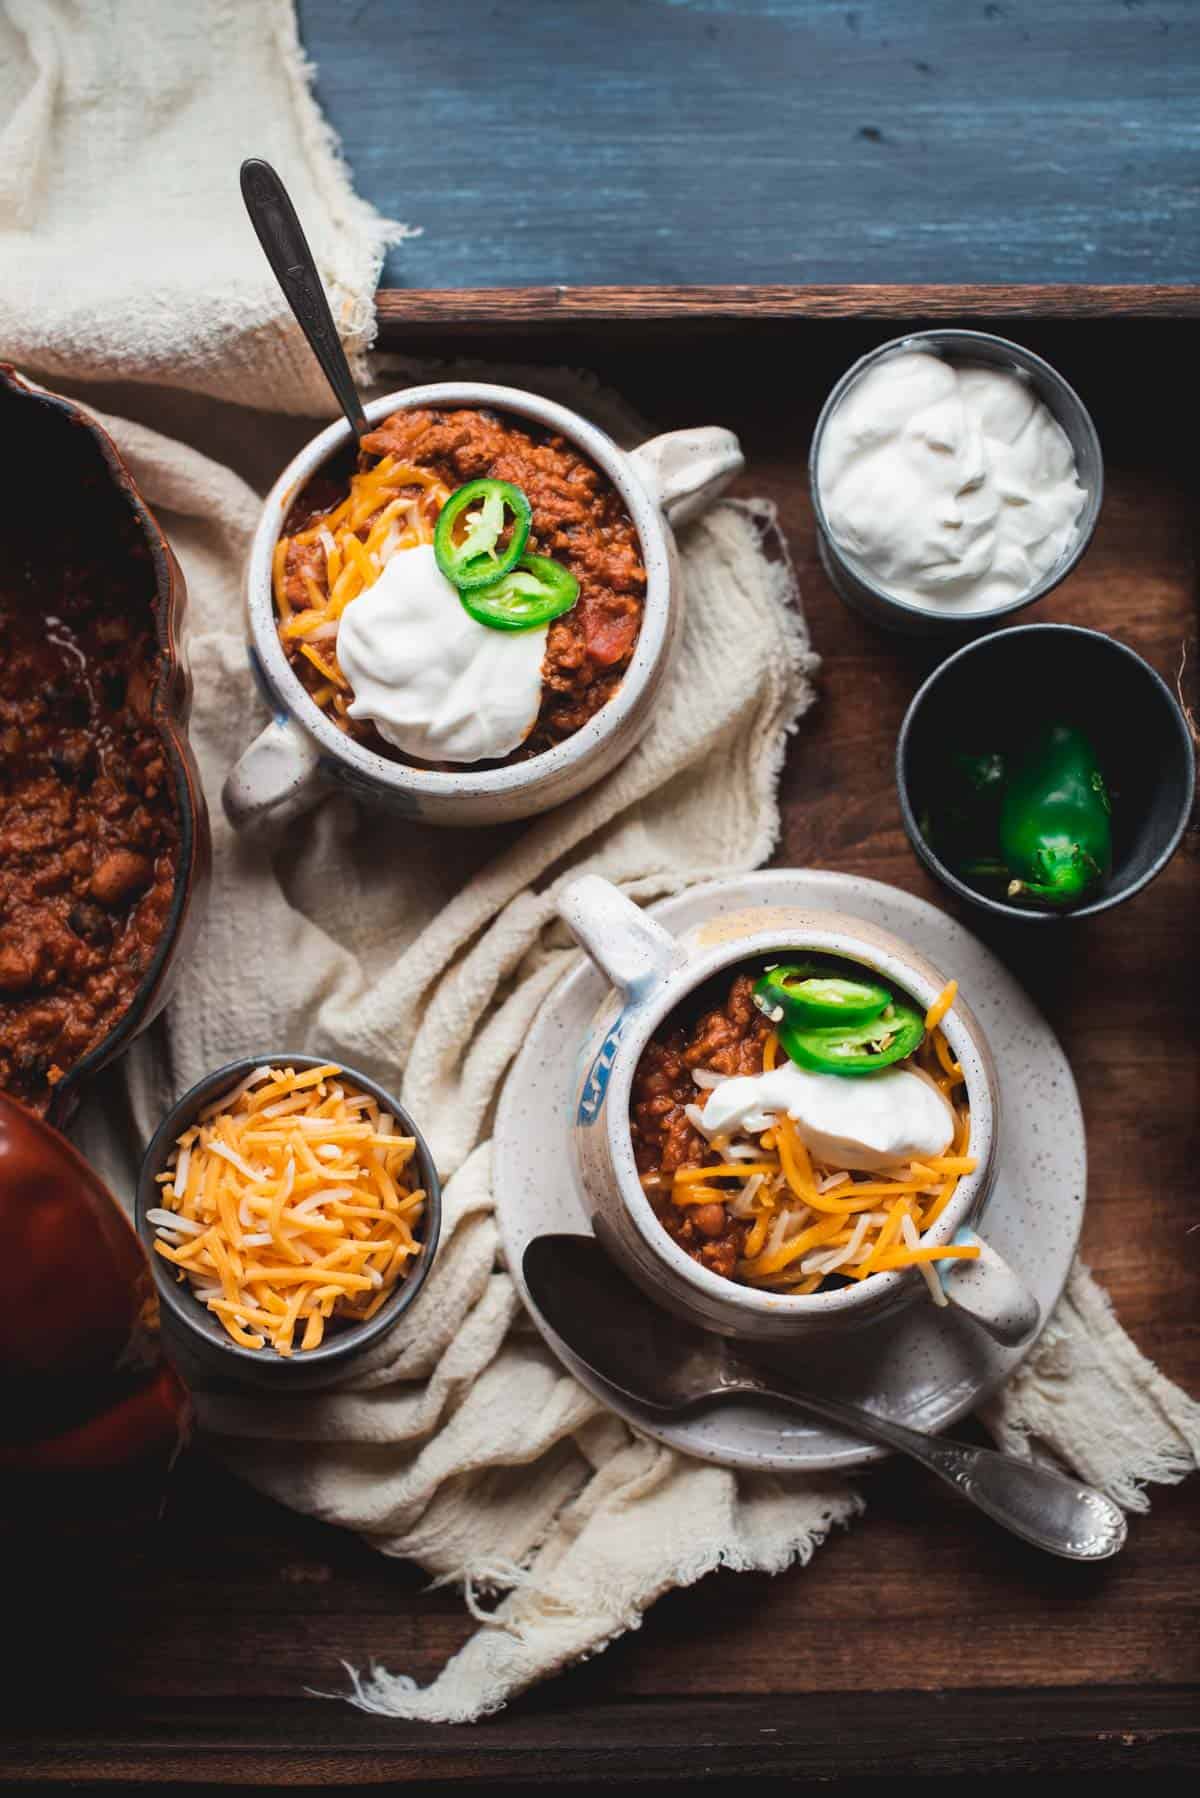 2 white bowls of pumpkin beef chili sitting on a tablecloth on a wooden tray.  The chili is topped with cheese, sour cream and jalapenos. There is a bowl of grated cheese on the tray, also sour cream and a pot of jalapenos. Part of the pumpkin shaped pot with the chili inside can be seen also.